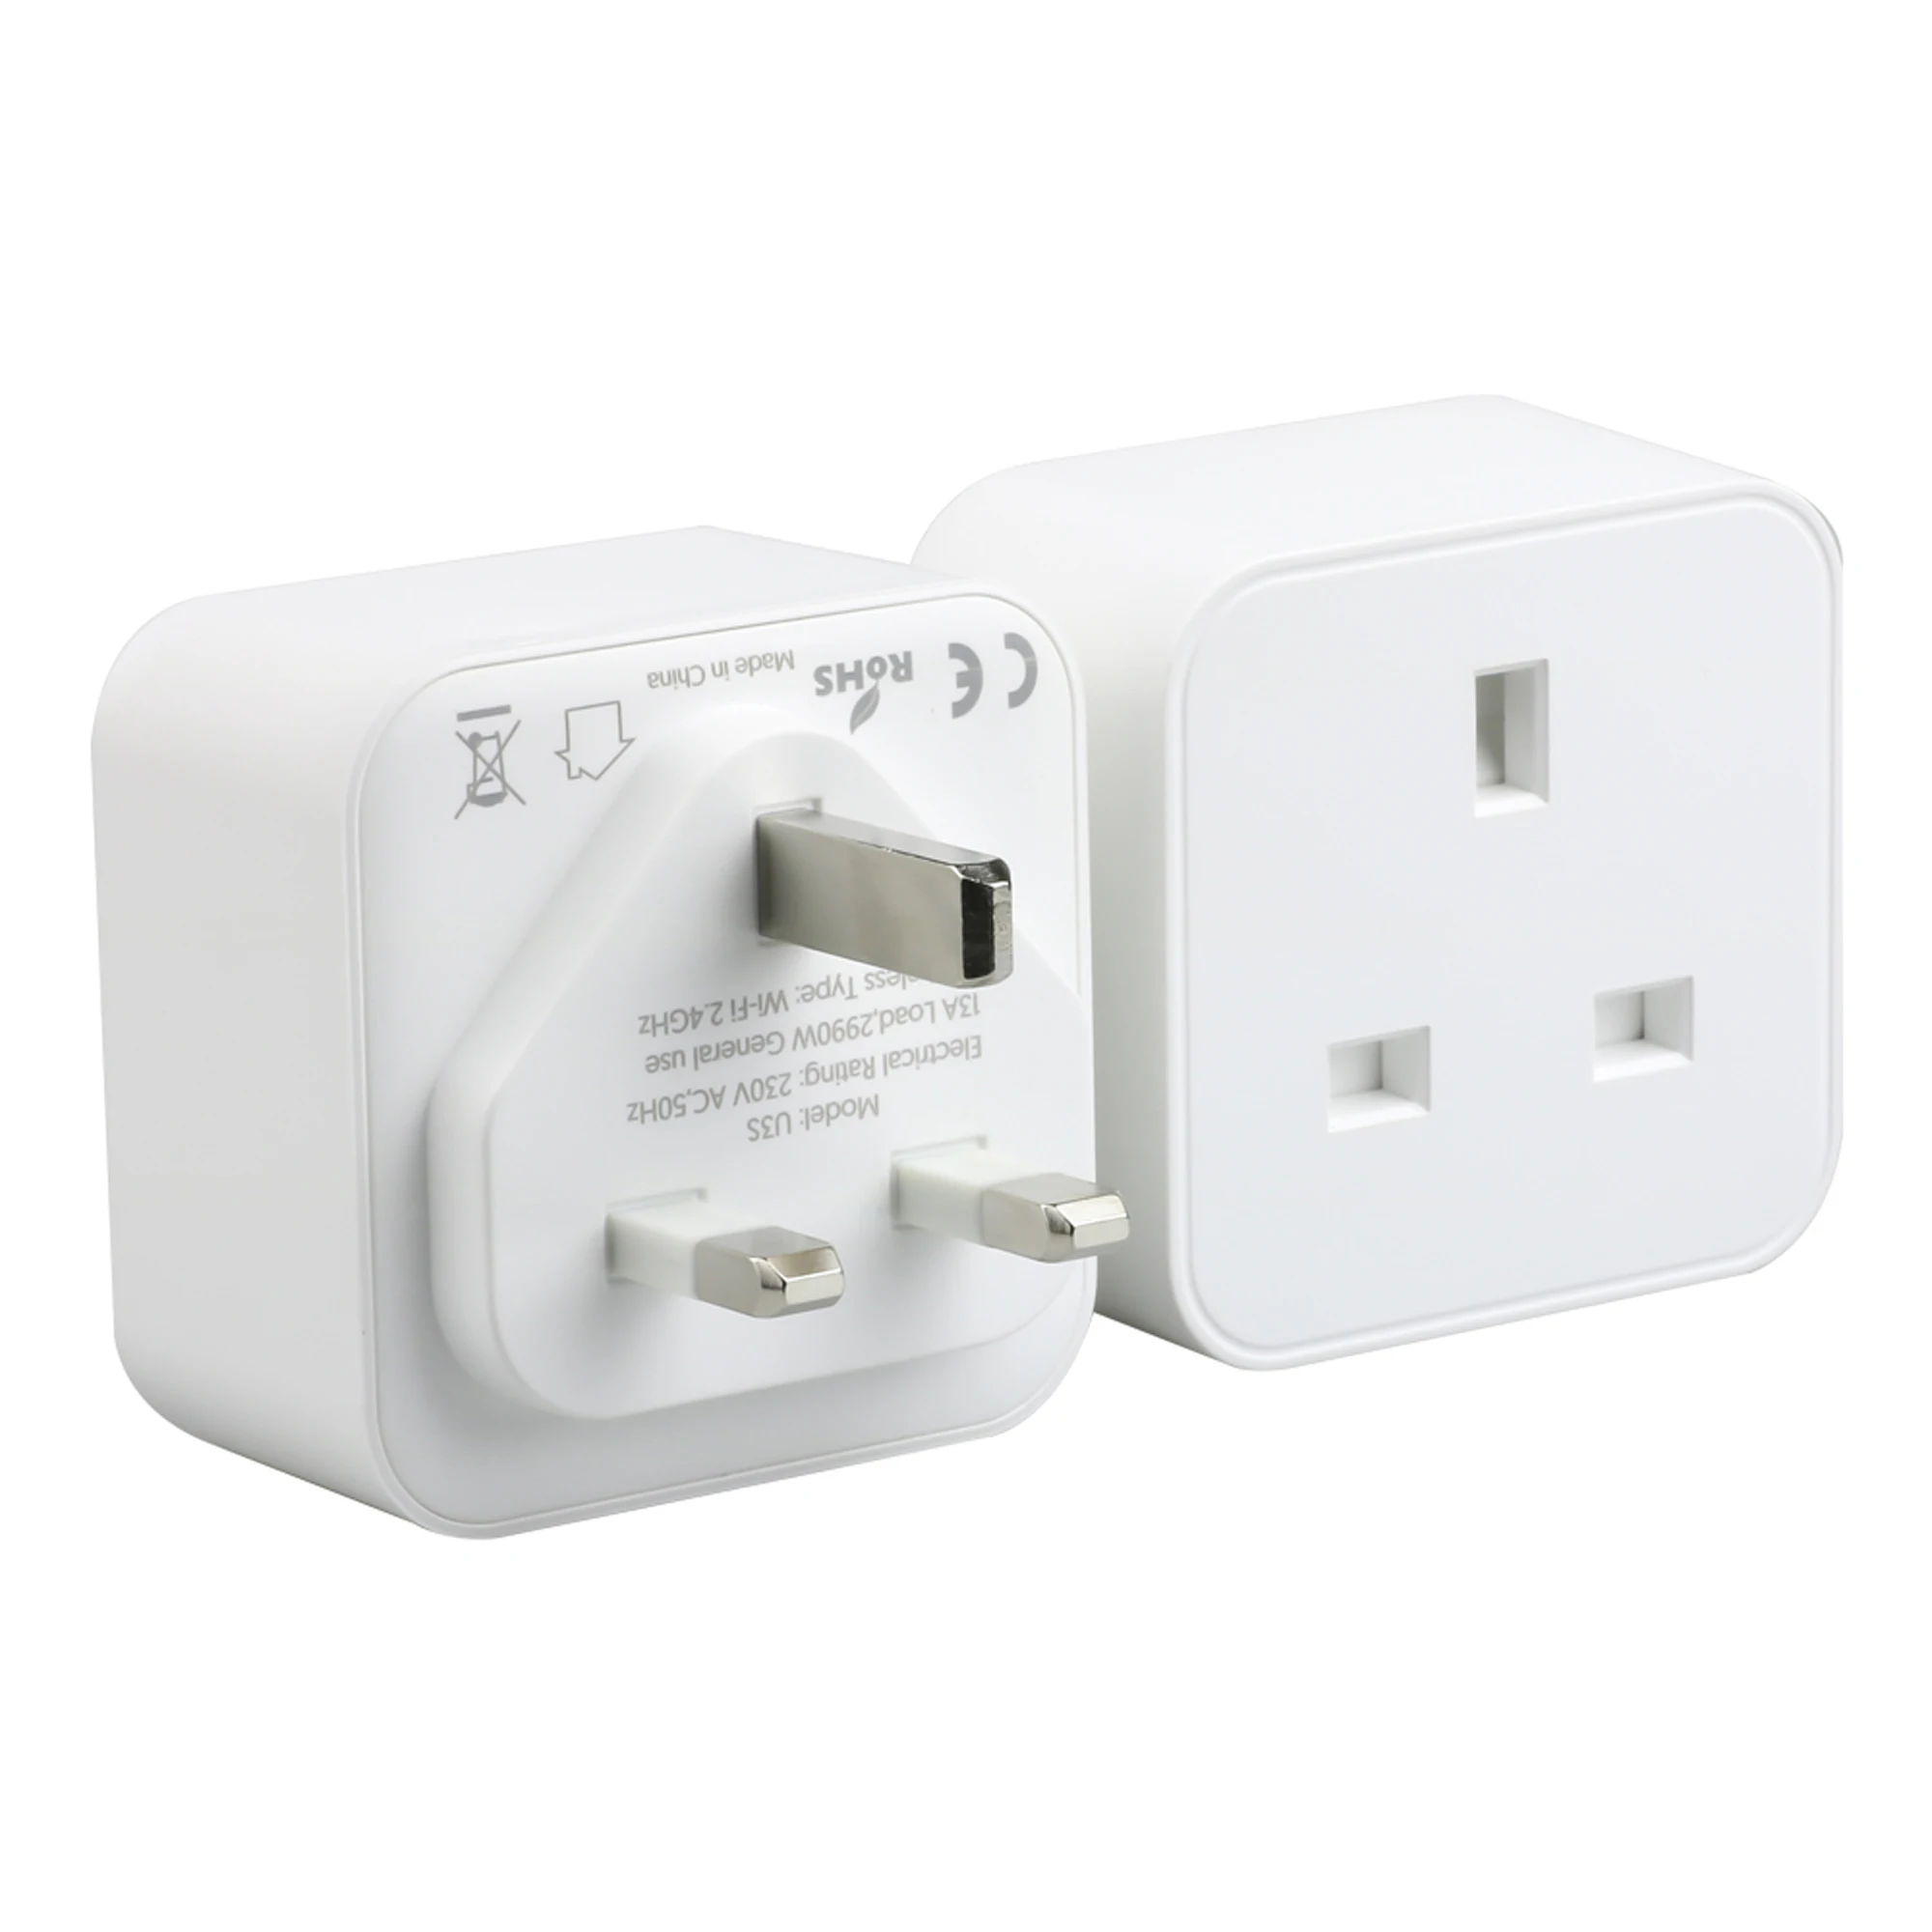 Electrical industrial mobile app power control adapter relay uk wireless socket timer outlet wifi wall socket smart plug (62247657896)